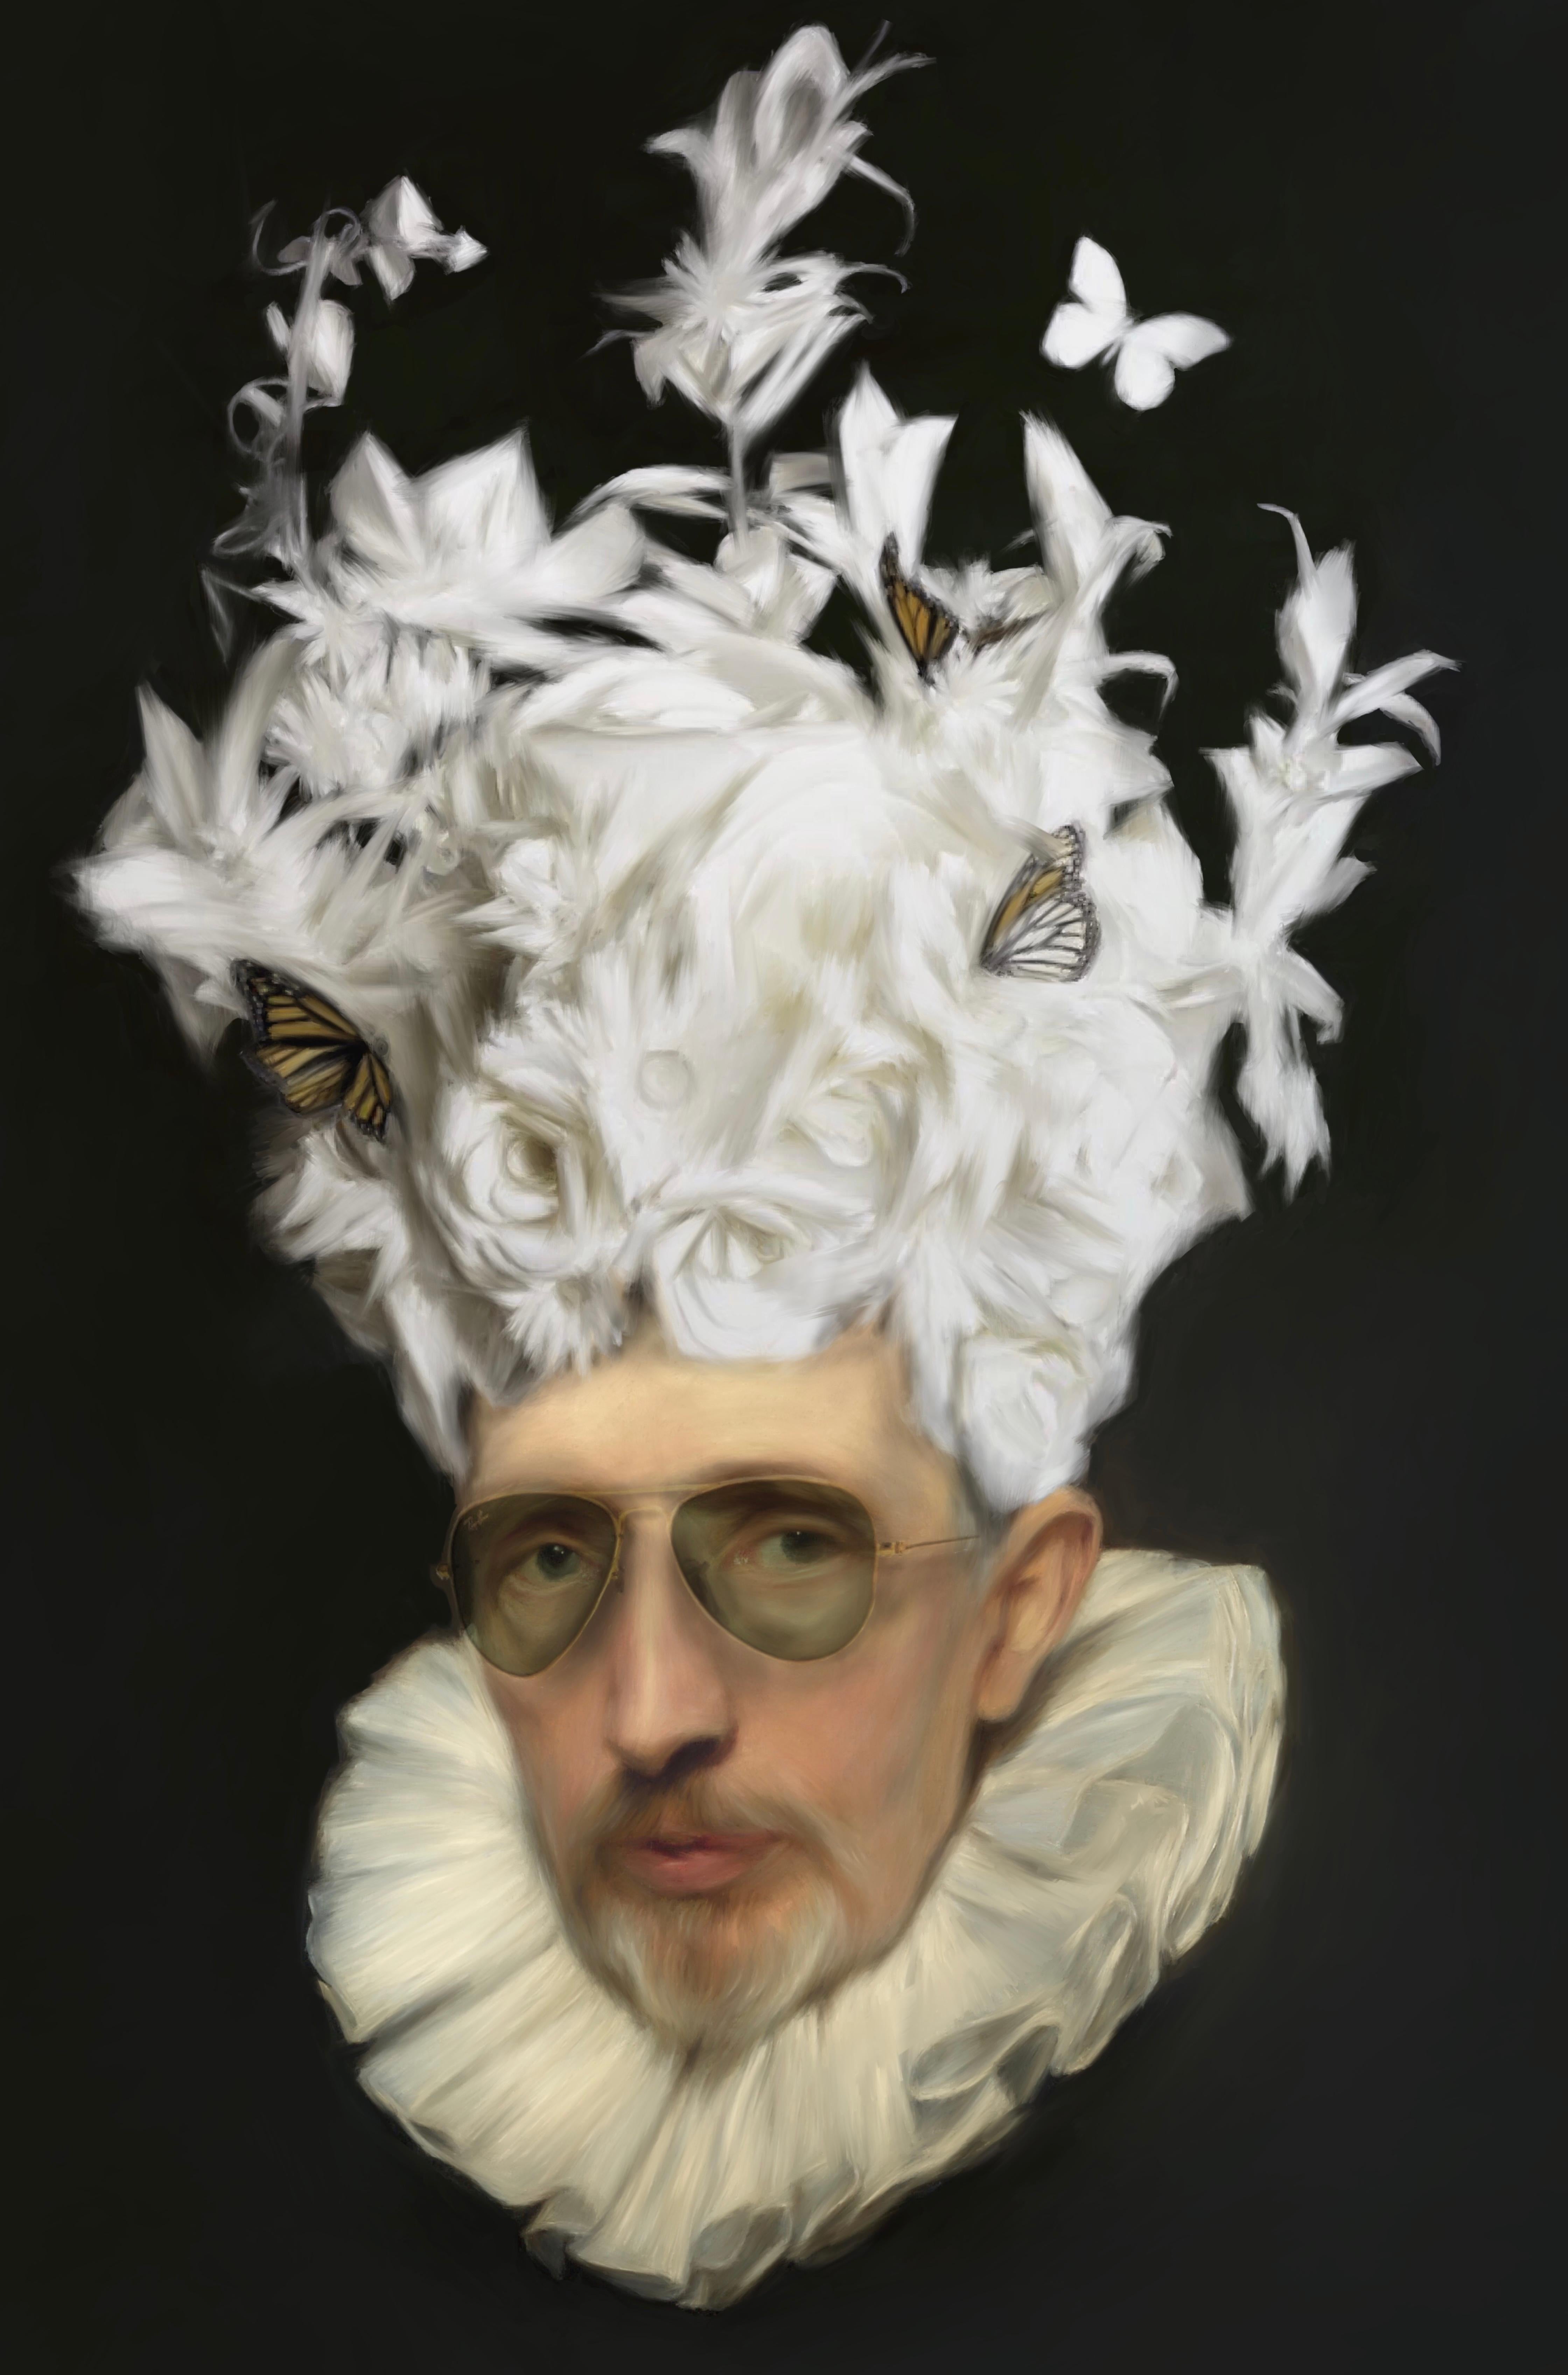 Baroque carnival. Surreal black and white portrait inspired in Old master's  - Print by Pablo de Pinini